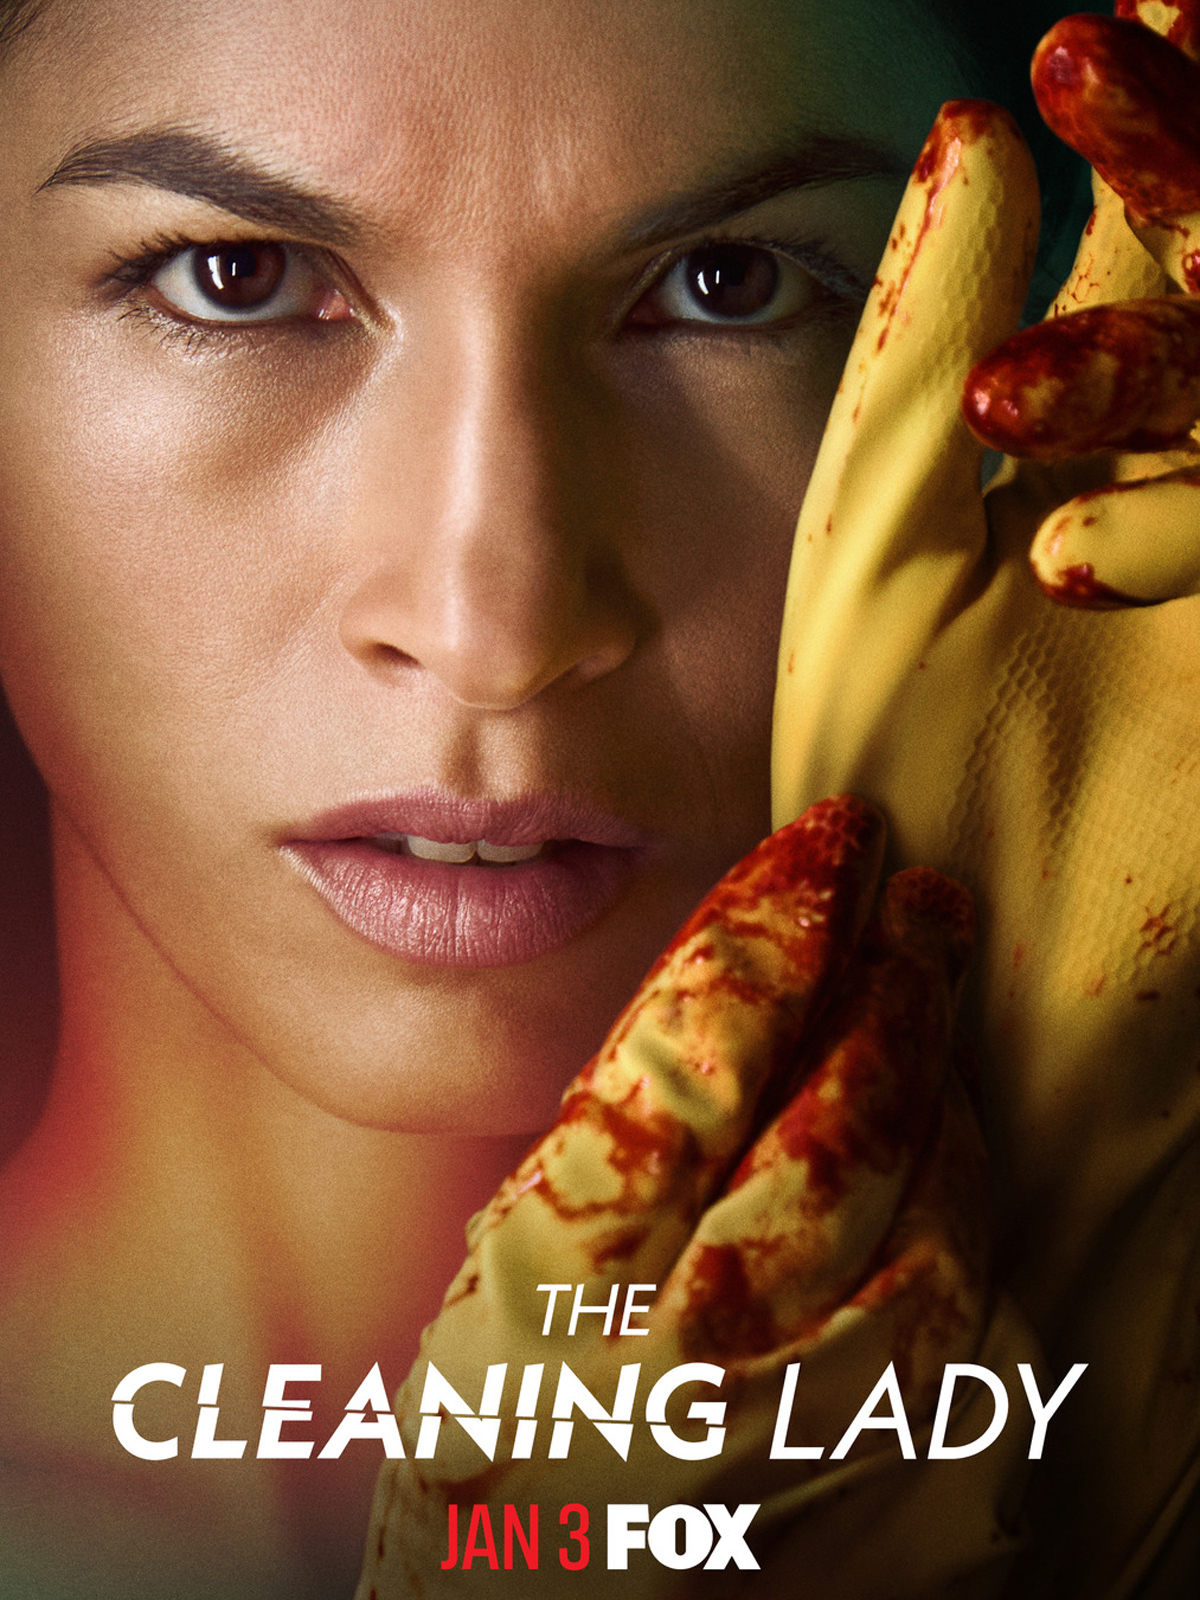 Assistir The Cleaning Lady Série Online